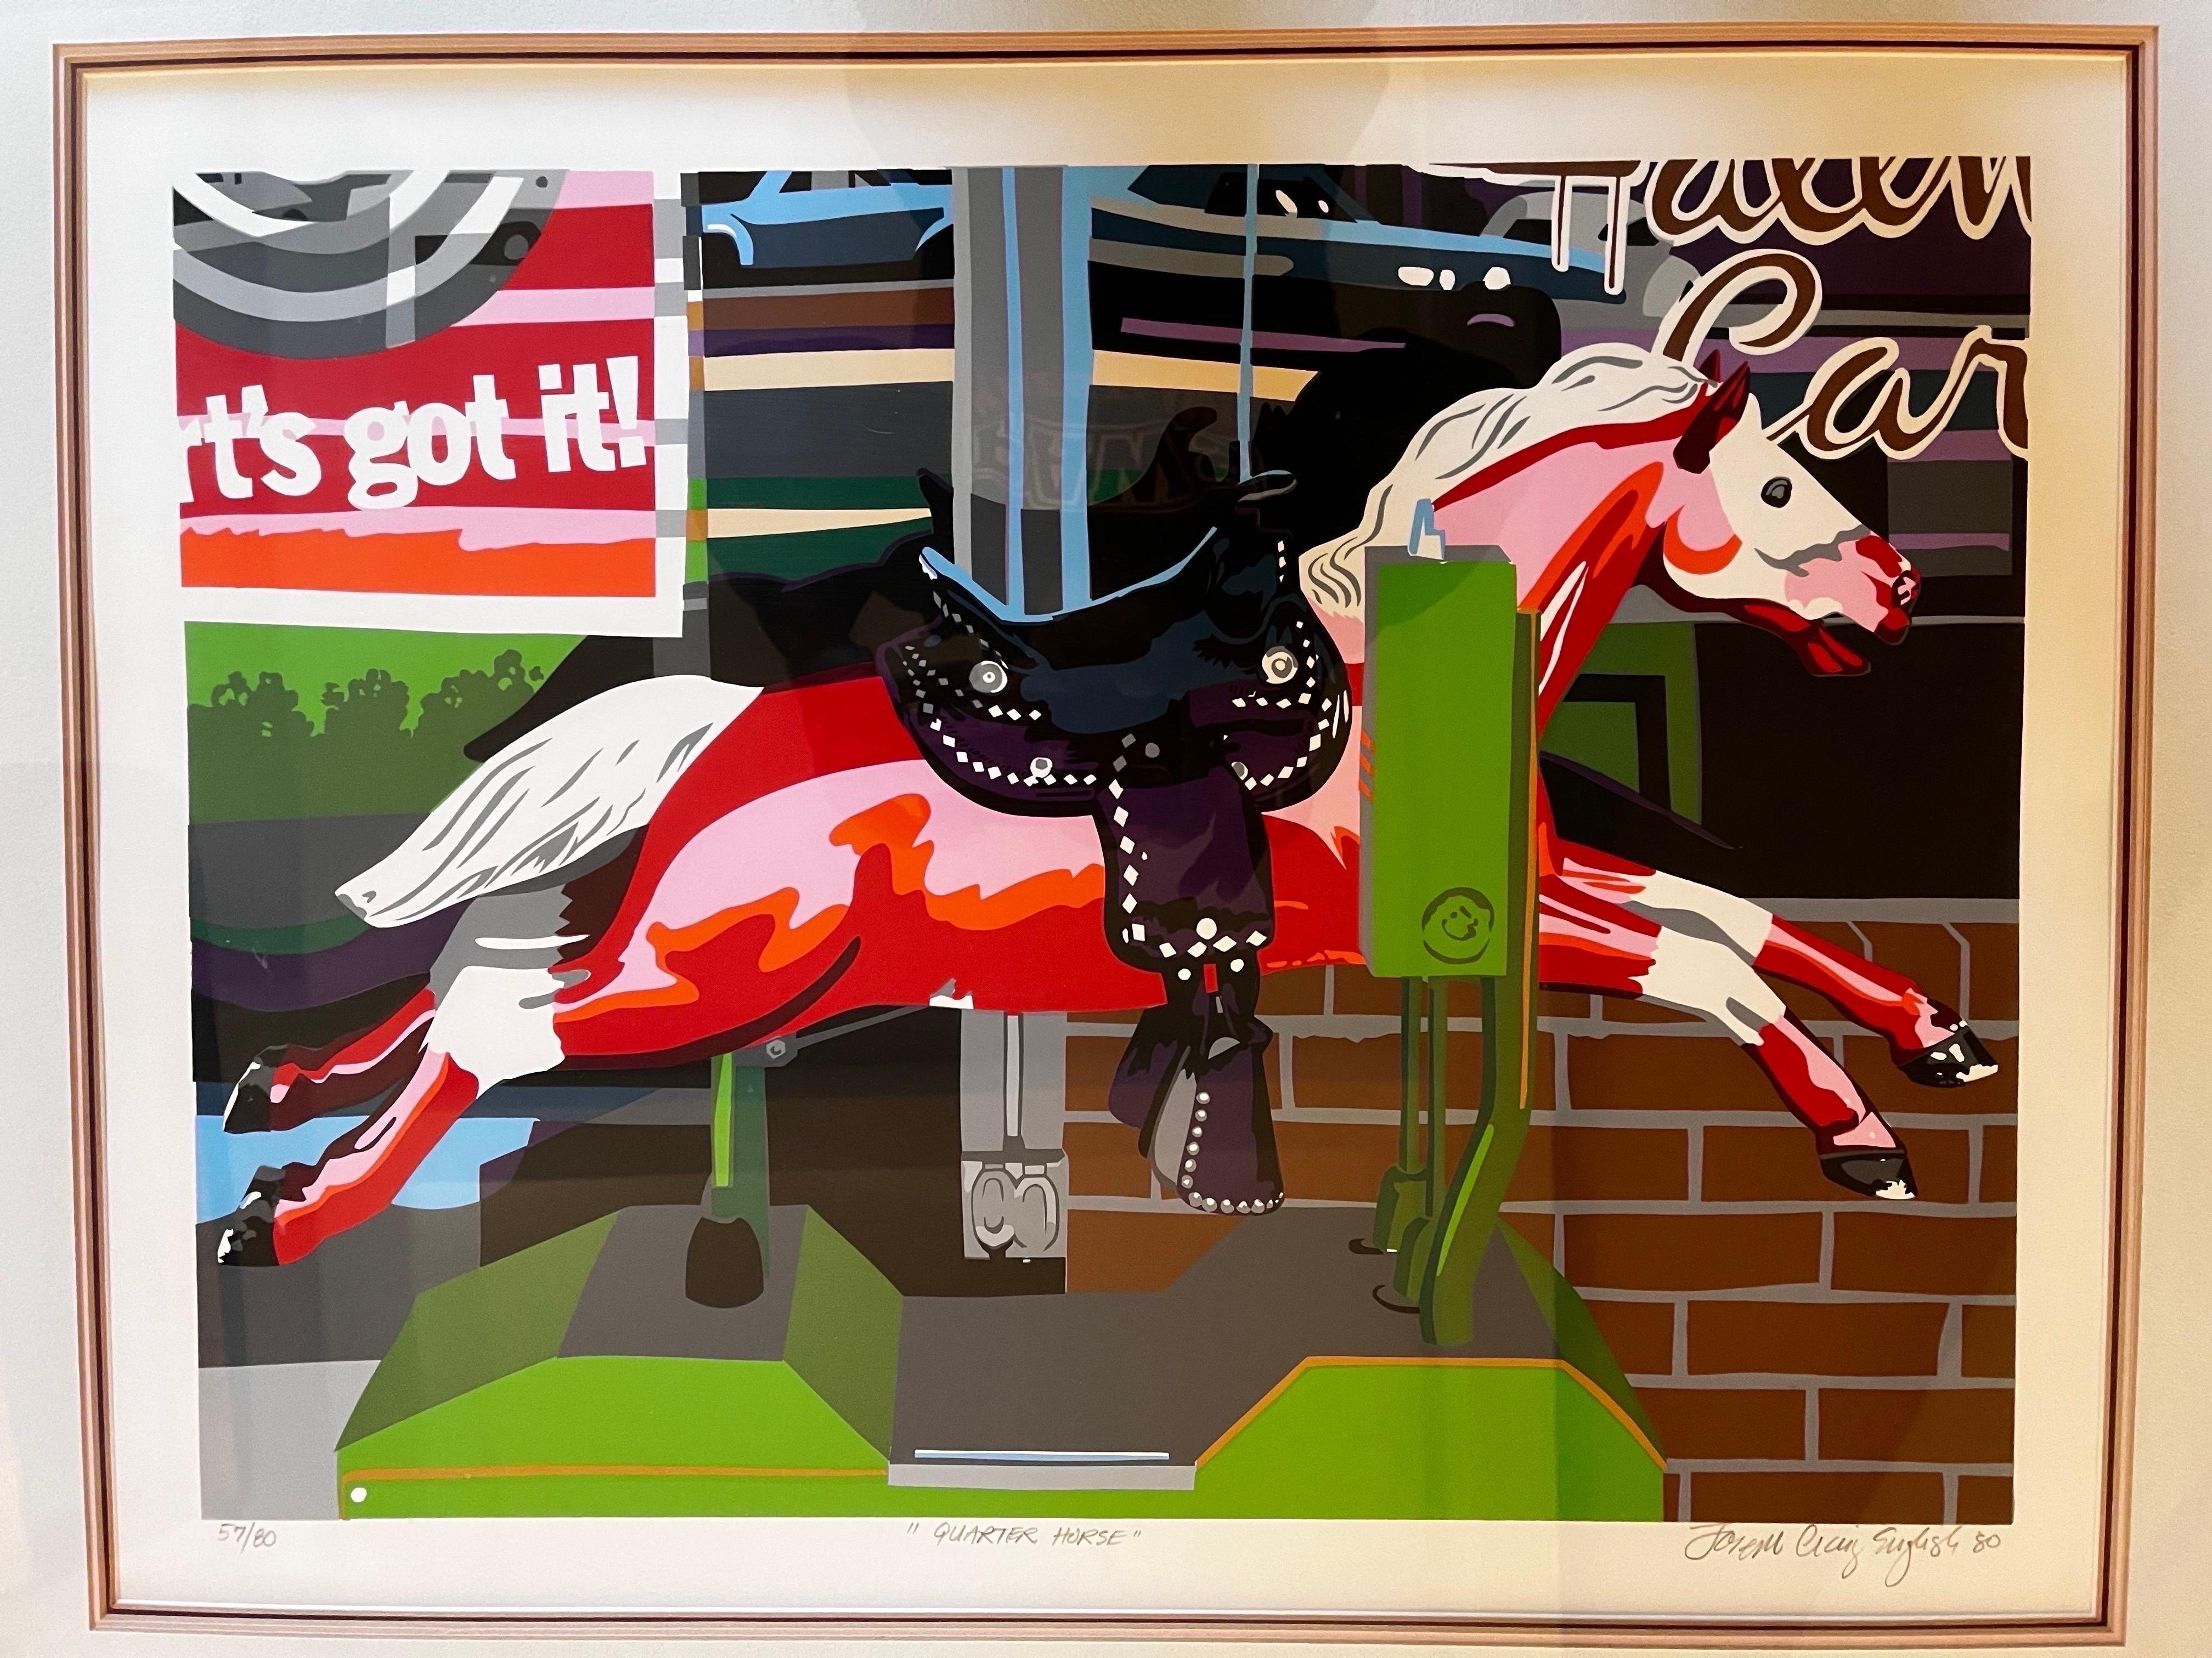 Colorful Pop Art Coin-Operated Horse Ride Print / Lithograph
Signed in Pencil (undeciphered)
